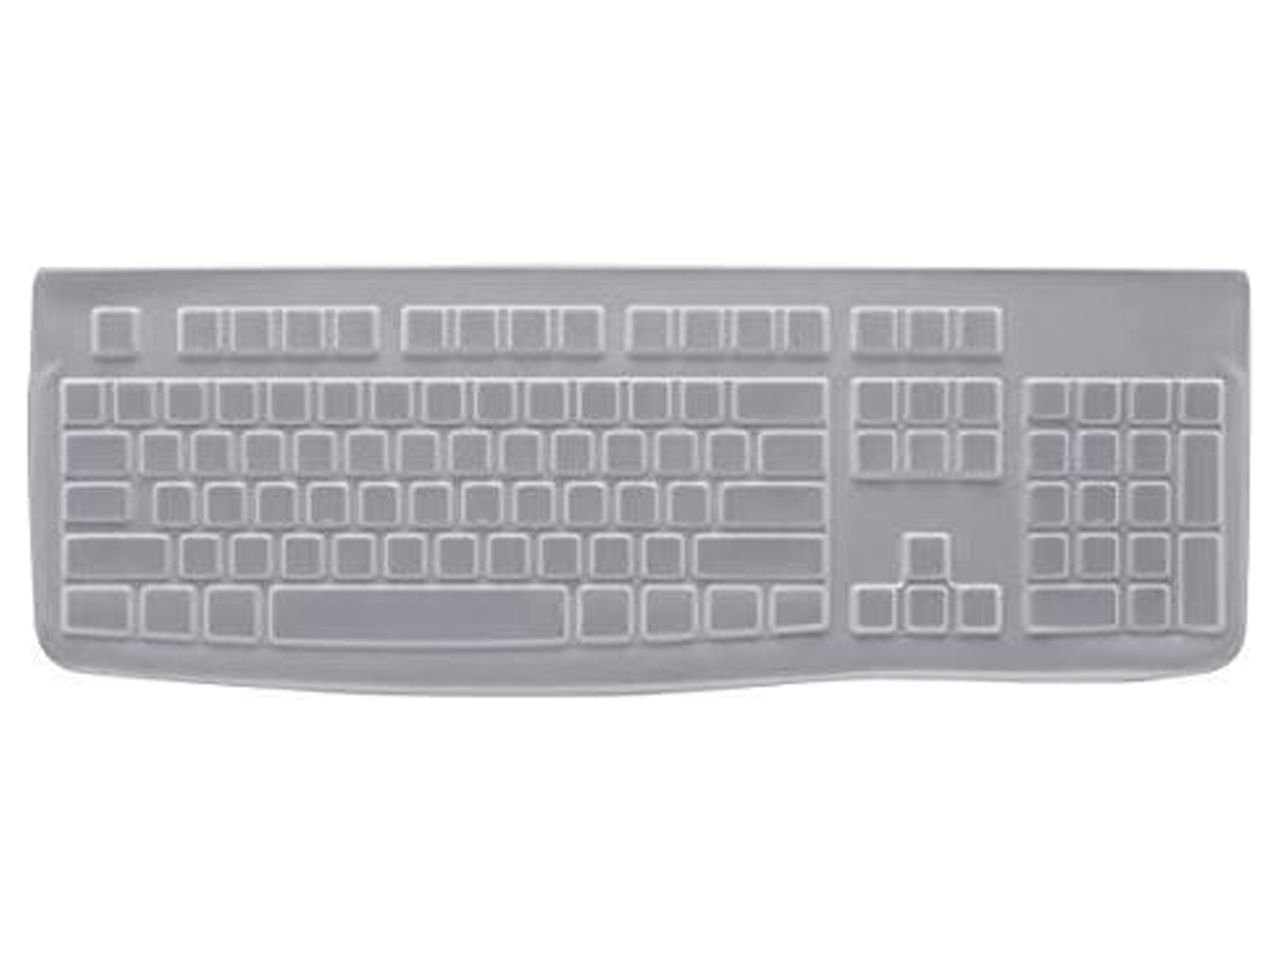 Logitech Protective Covers for K120 Keyboard - Silicone - image 5 of 5